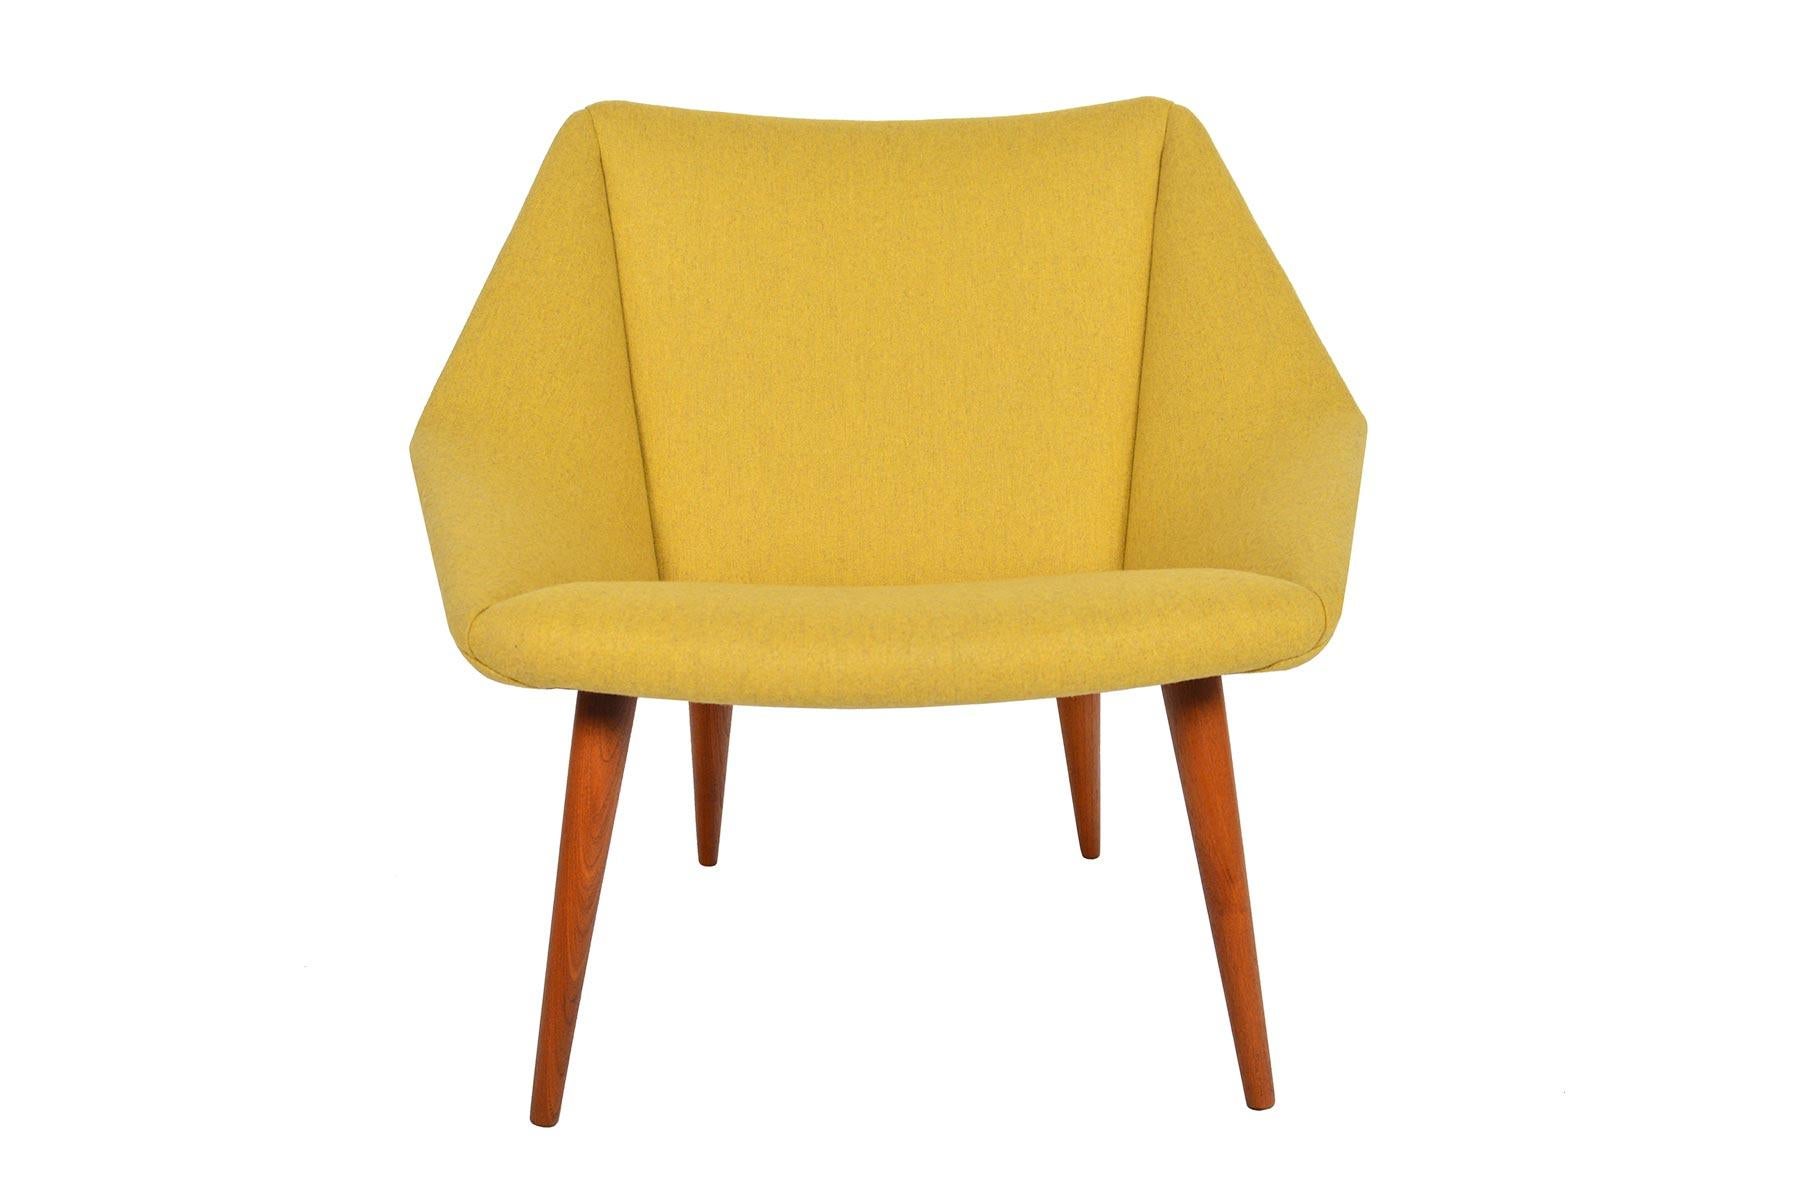 20th Century Nanna Ditzel Model 93 Tux Lounge Chair in Goldenrod